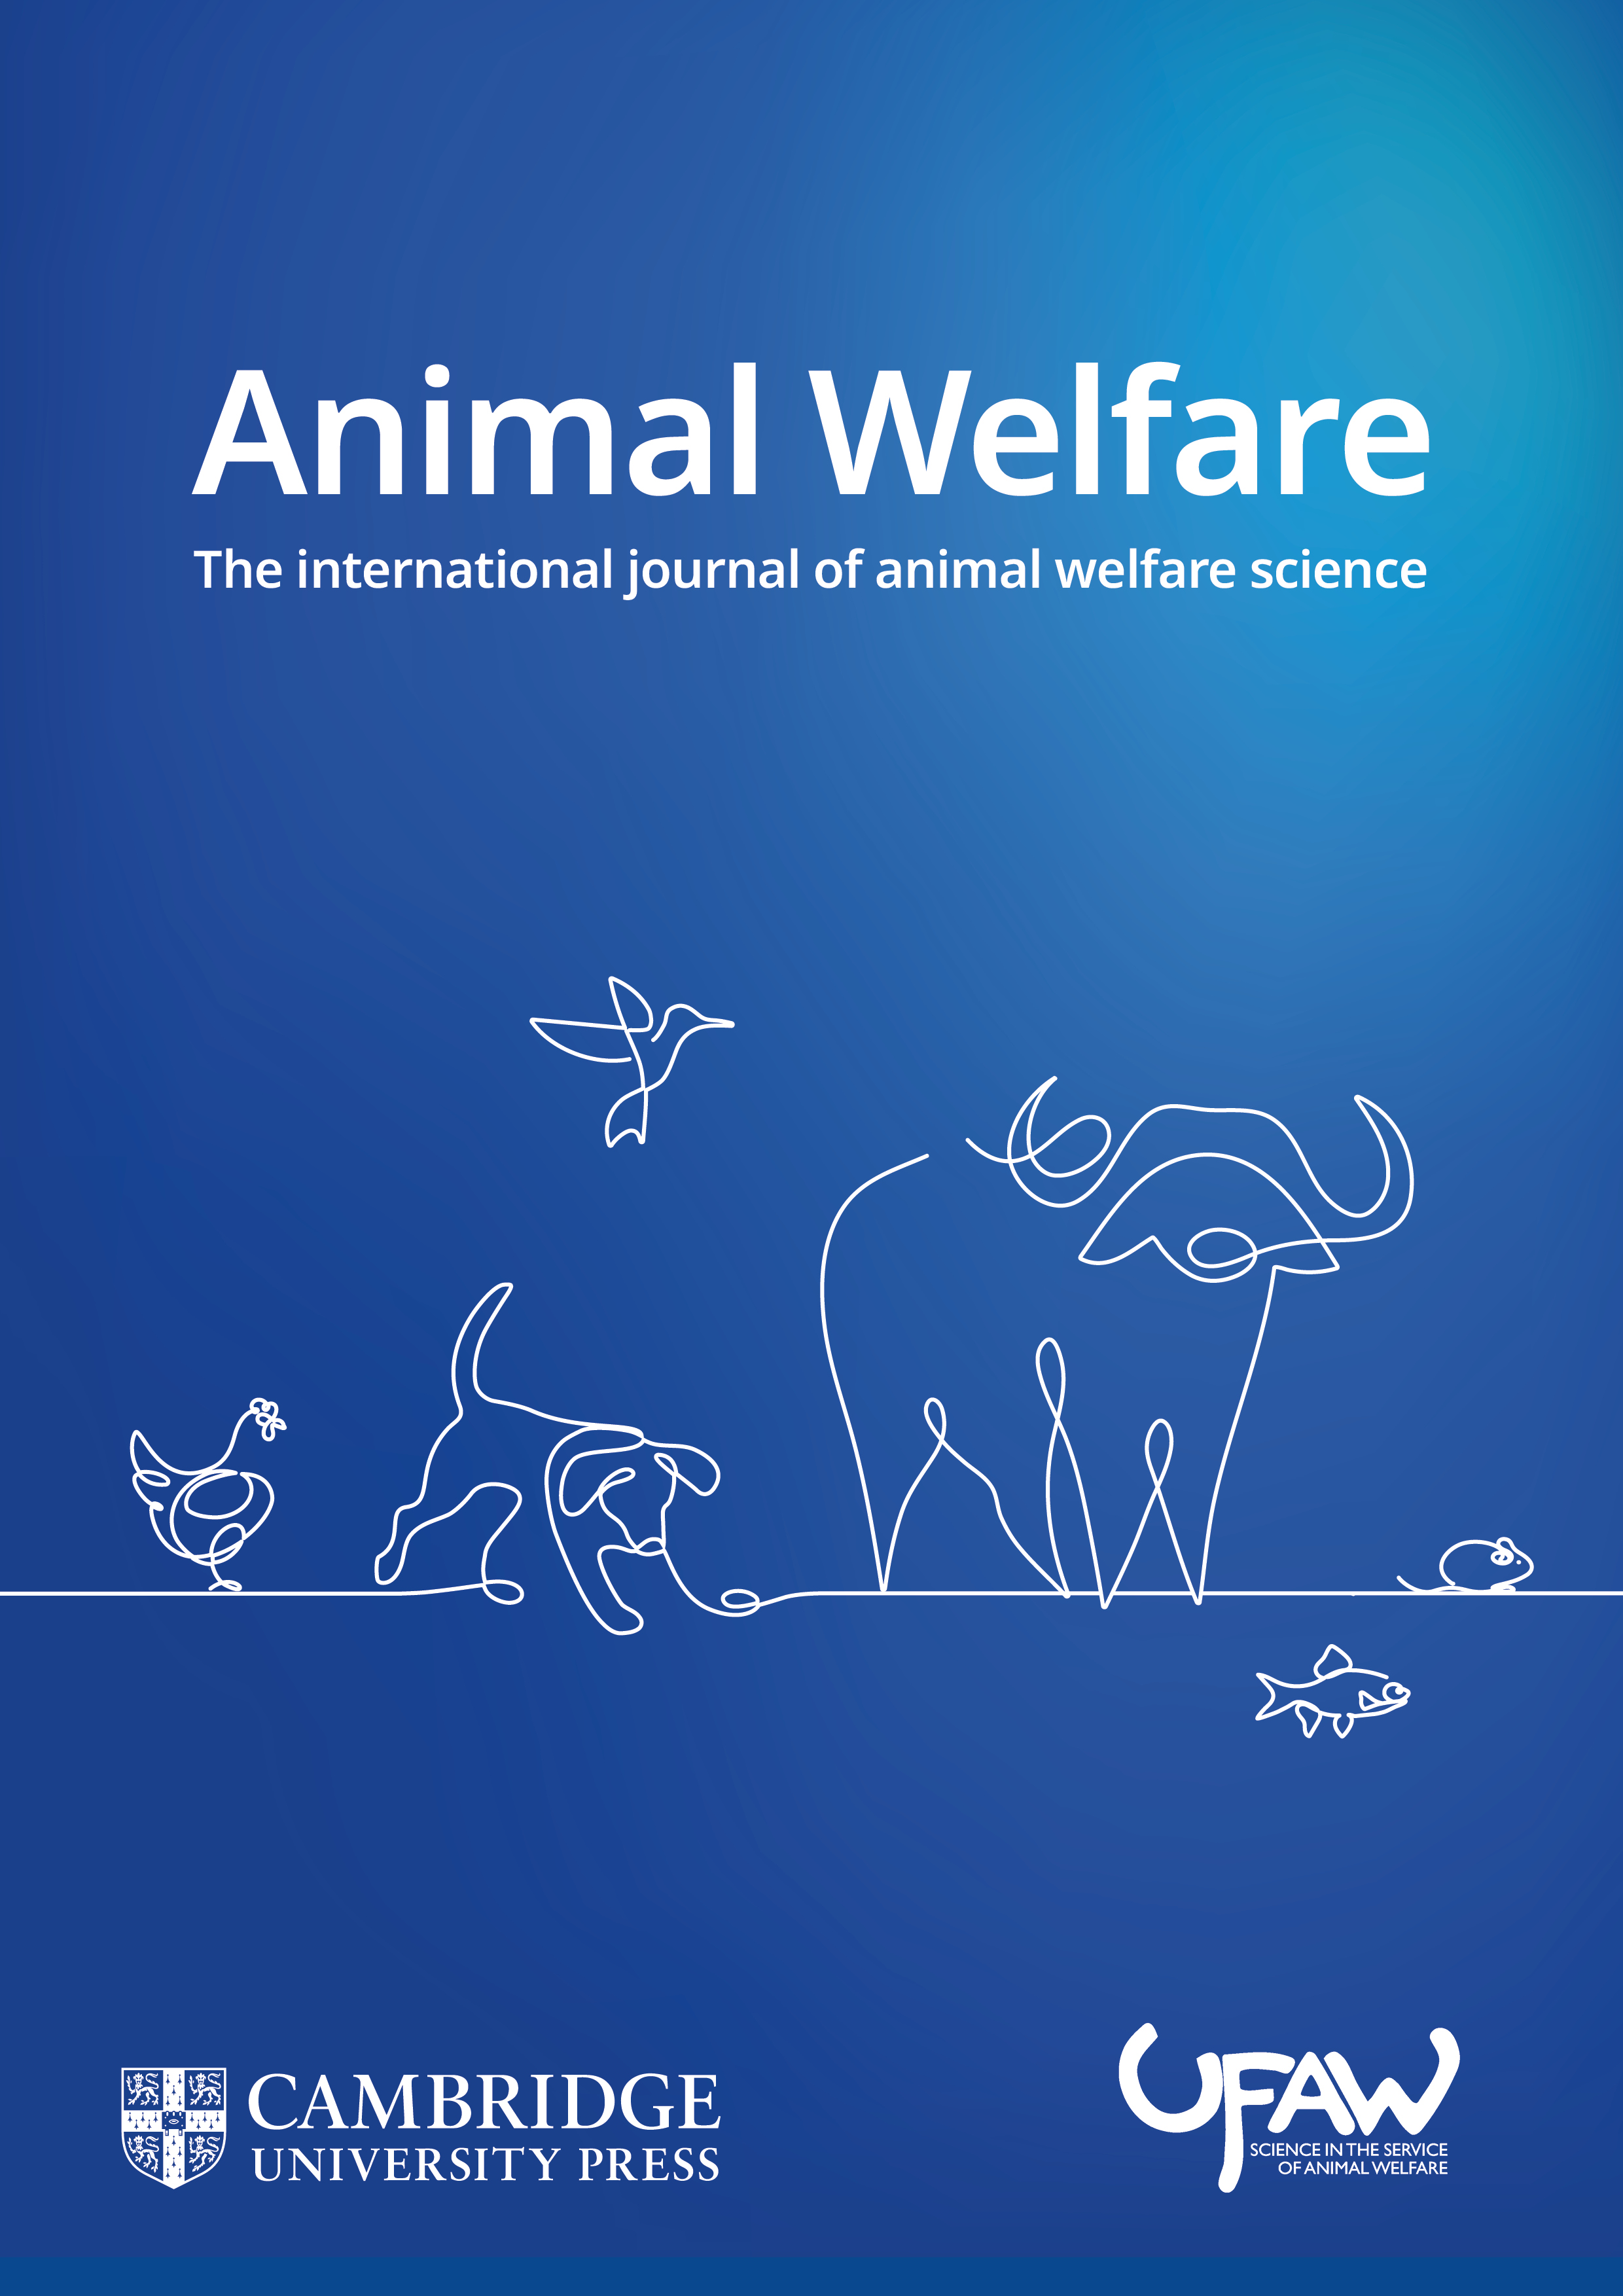 Cats just want to have fun: Associations between play and welfare in  domestic cats | Animal Welfare | Cambridge Core